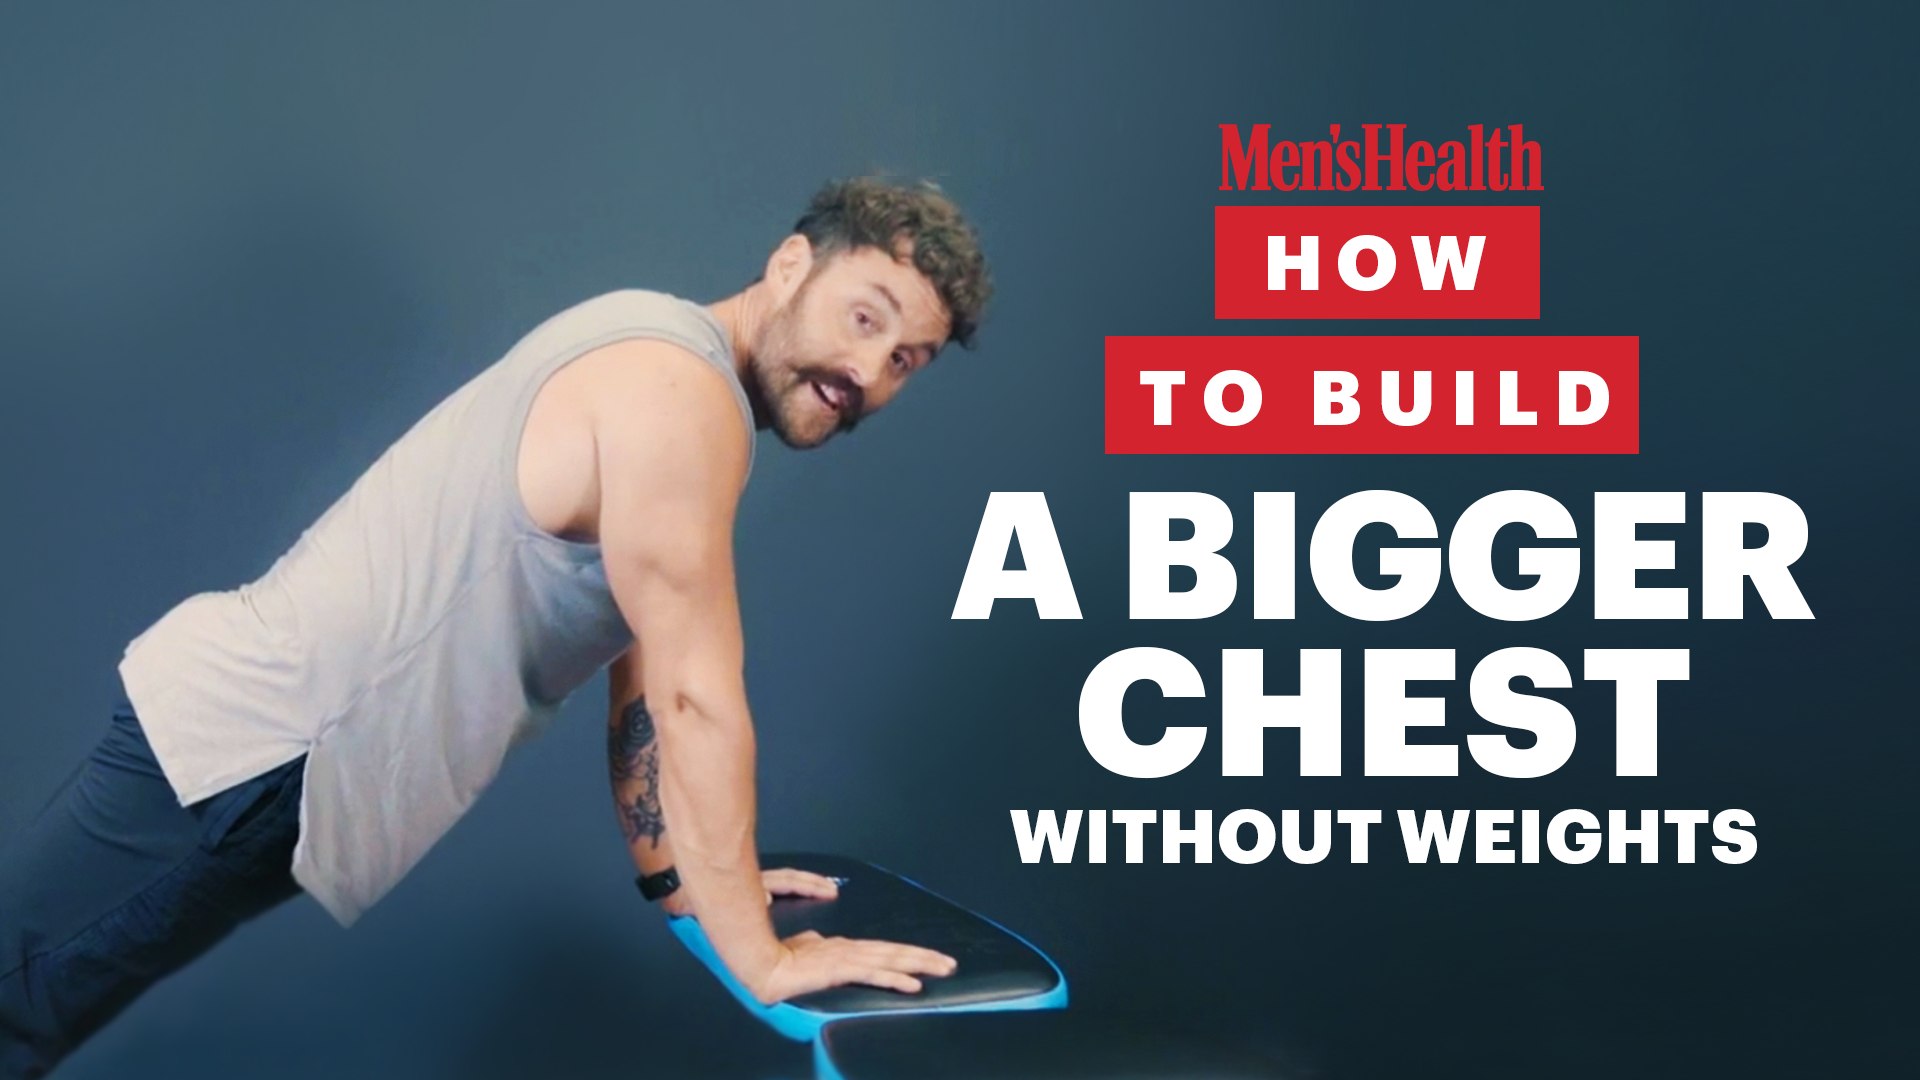 How To Build A Bigger Chest Without Lifting Weights - video